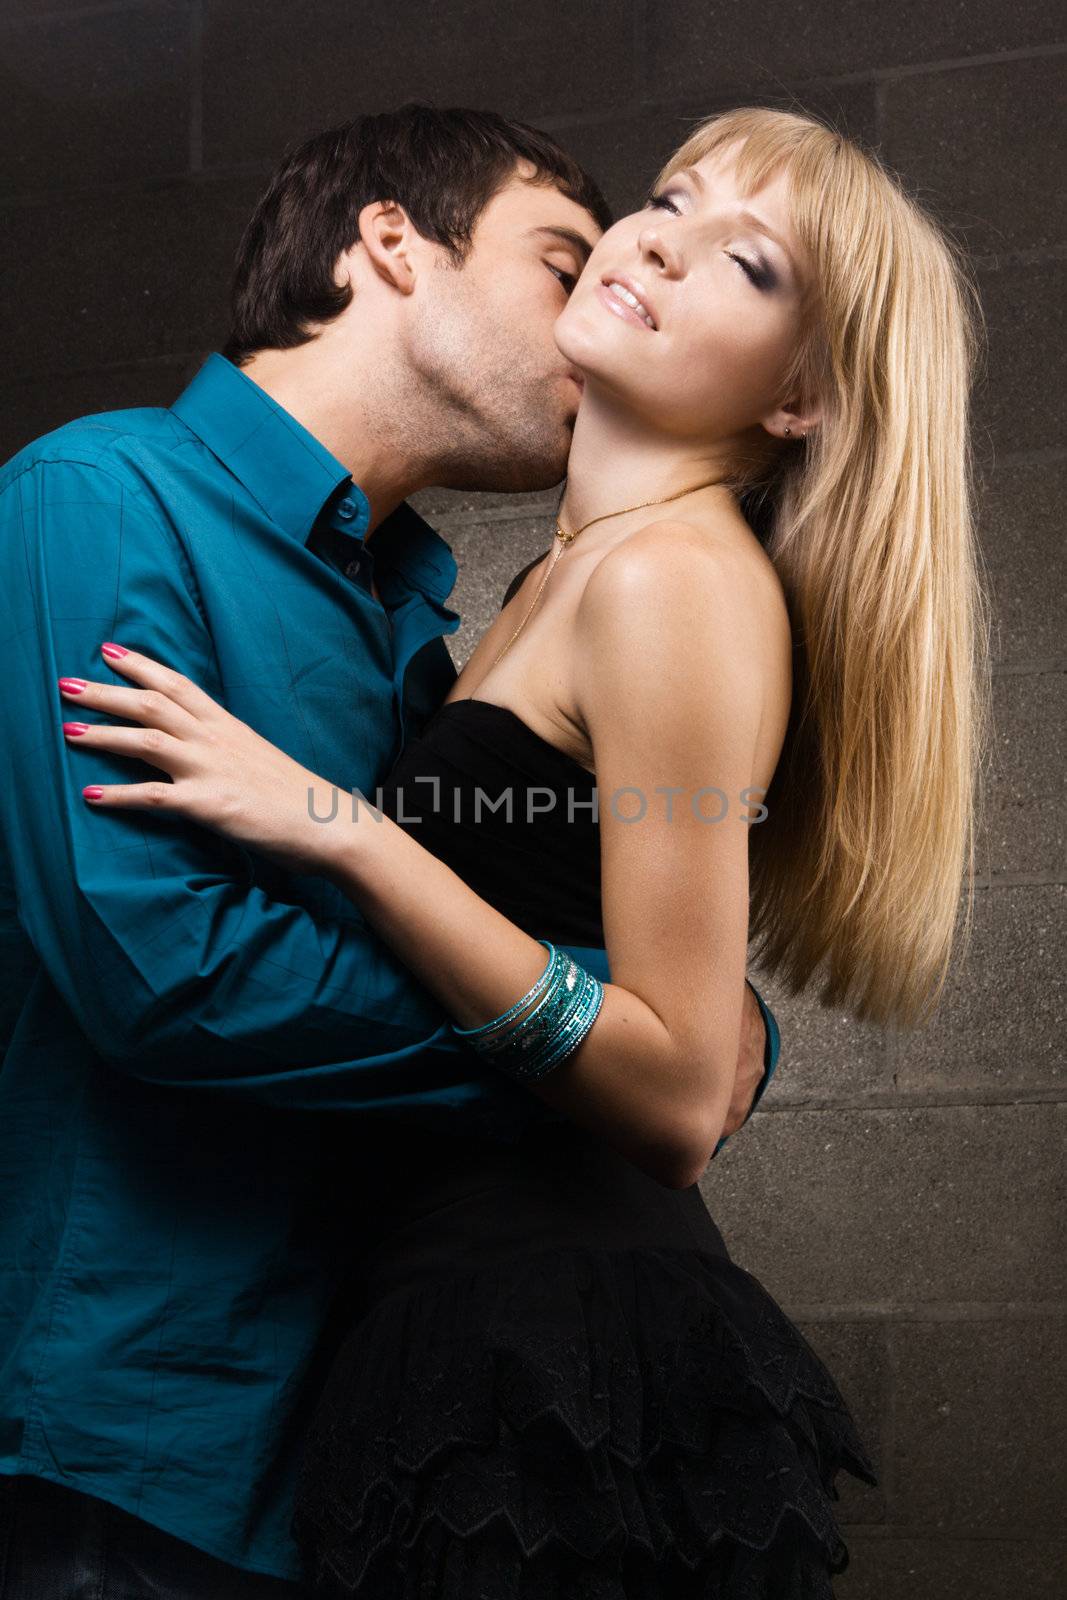 Young romantic couple kissing in house interior